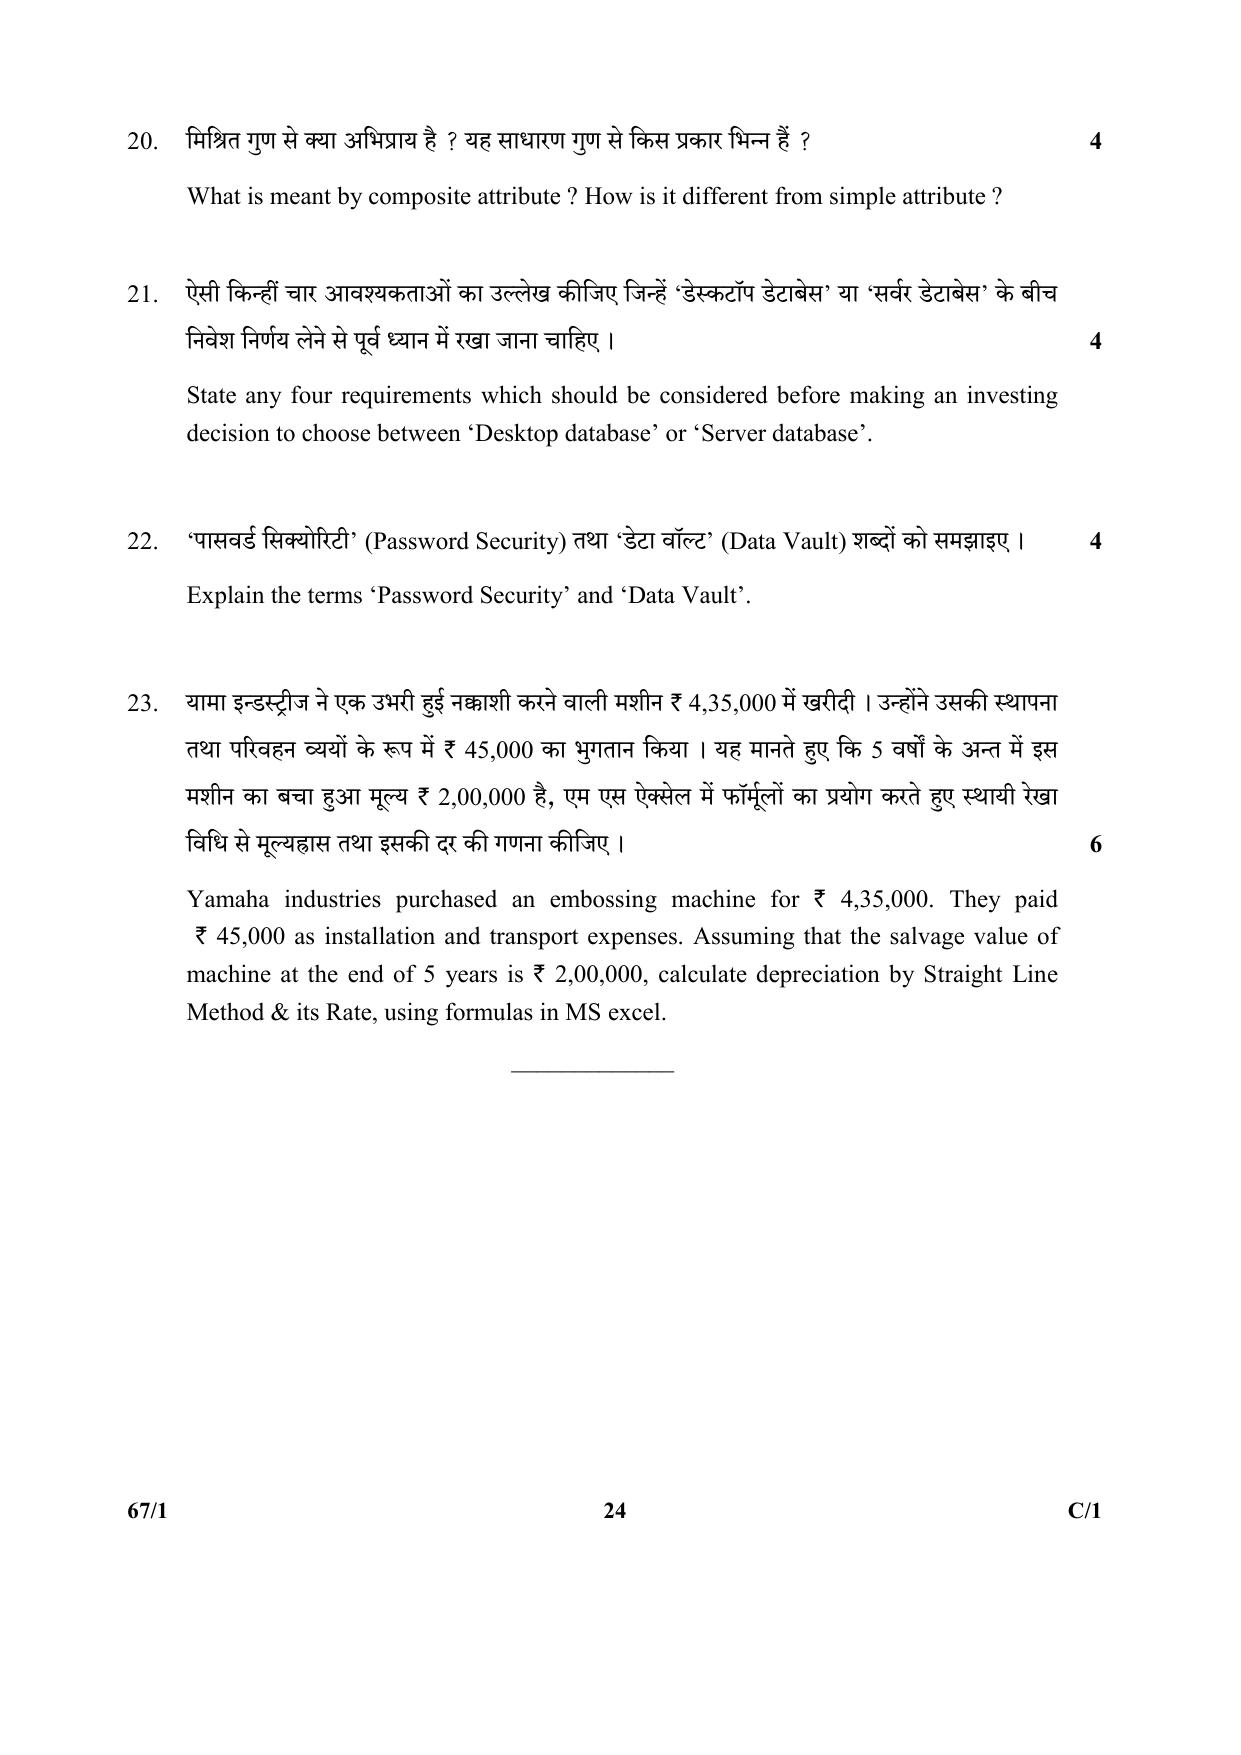 CBSE Class 12 67-1  (Accountancy) 2018 Compartment Question Paper - Page 24